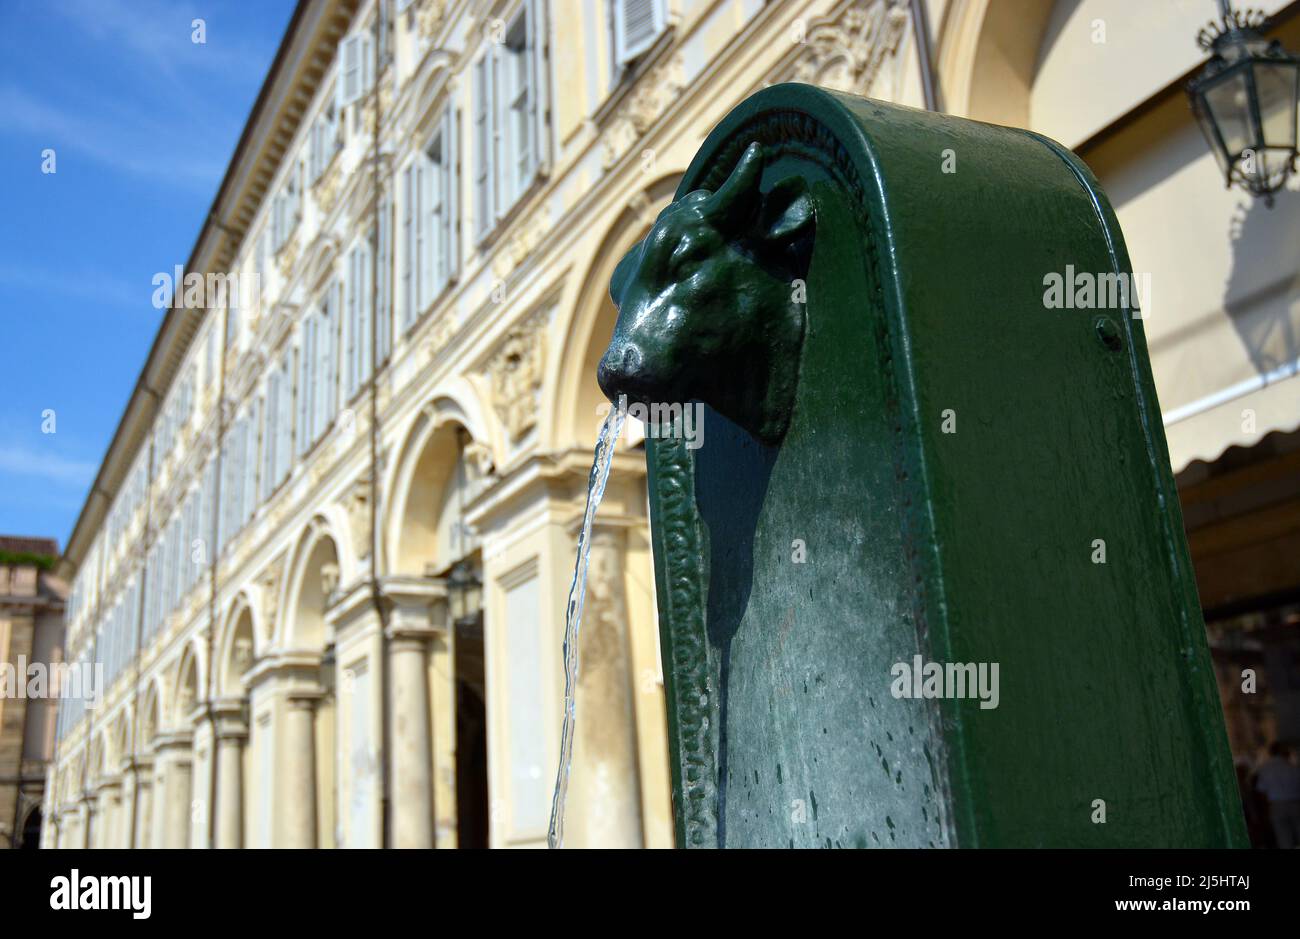 Turin, Piedmont, Italy - The Toret, traditional public water fountain with green bull shape, symbol of the city. Stock Photo